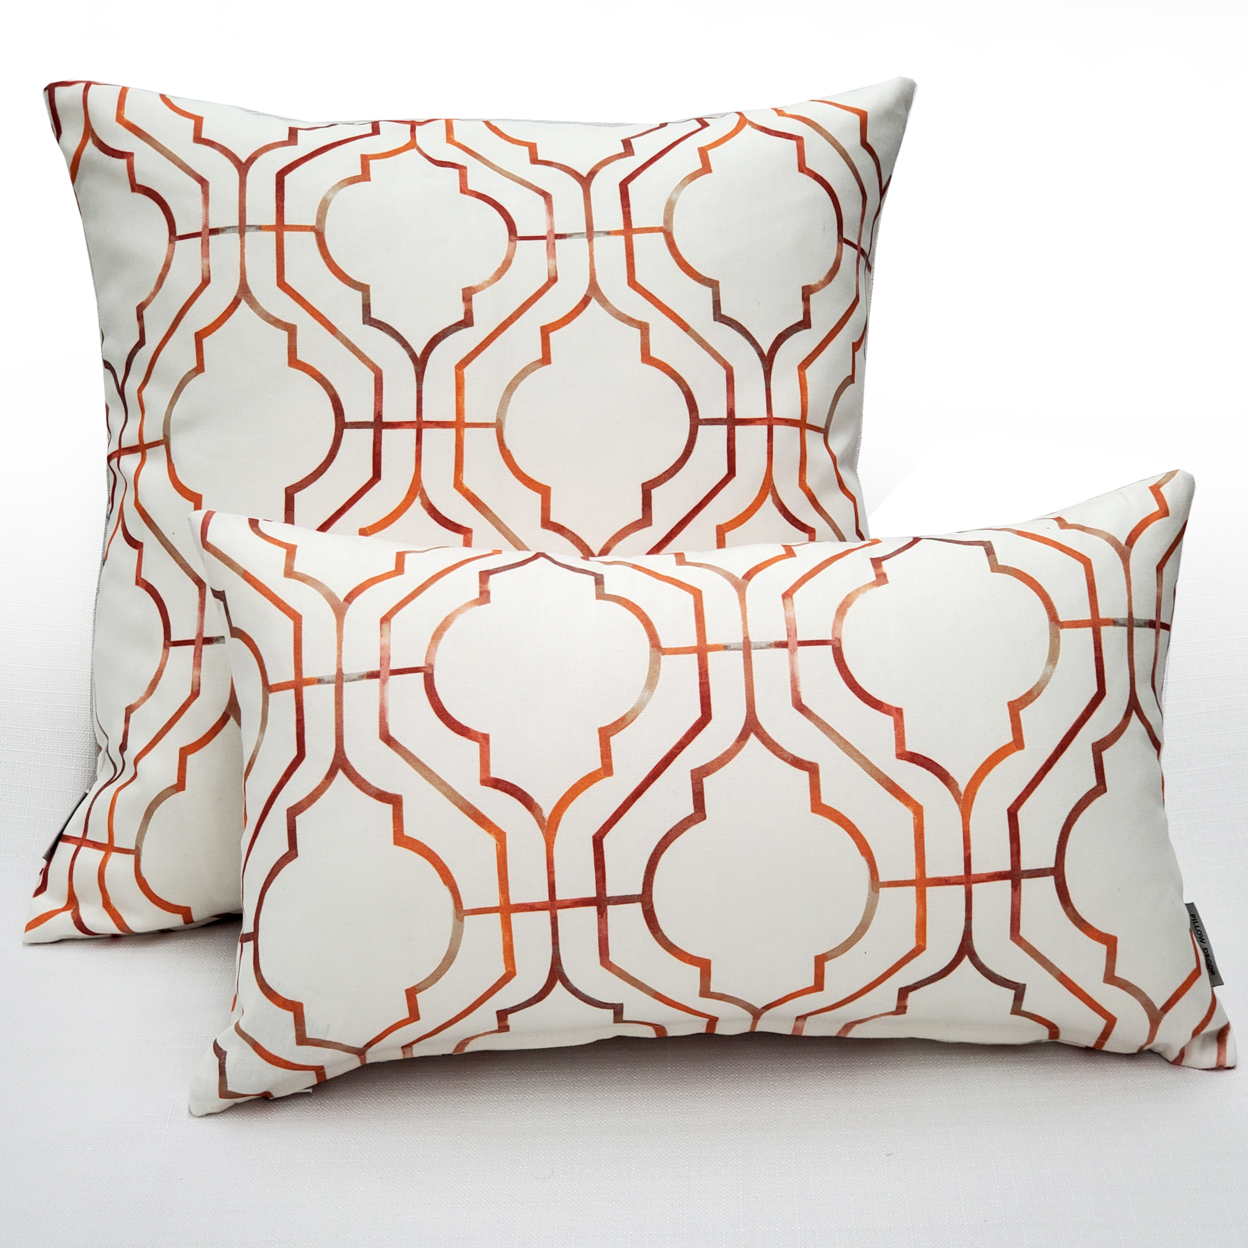 Biltmore Gate Orange Throw Pillow 12x20 Inches Square, Complete Pillow With Polyfill Pillow Insert